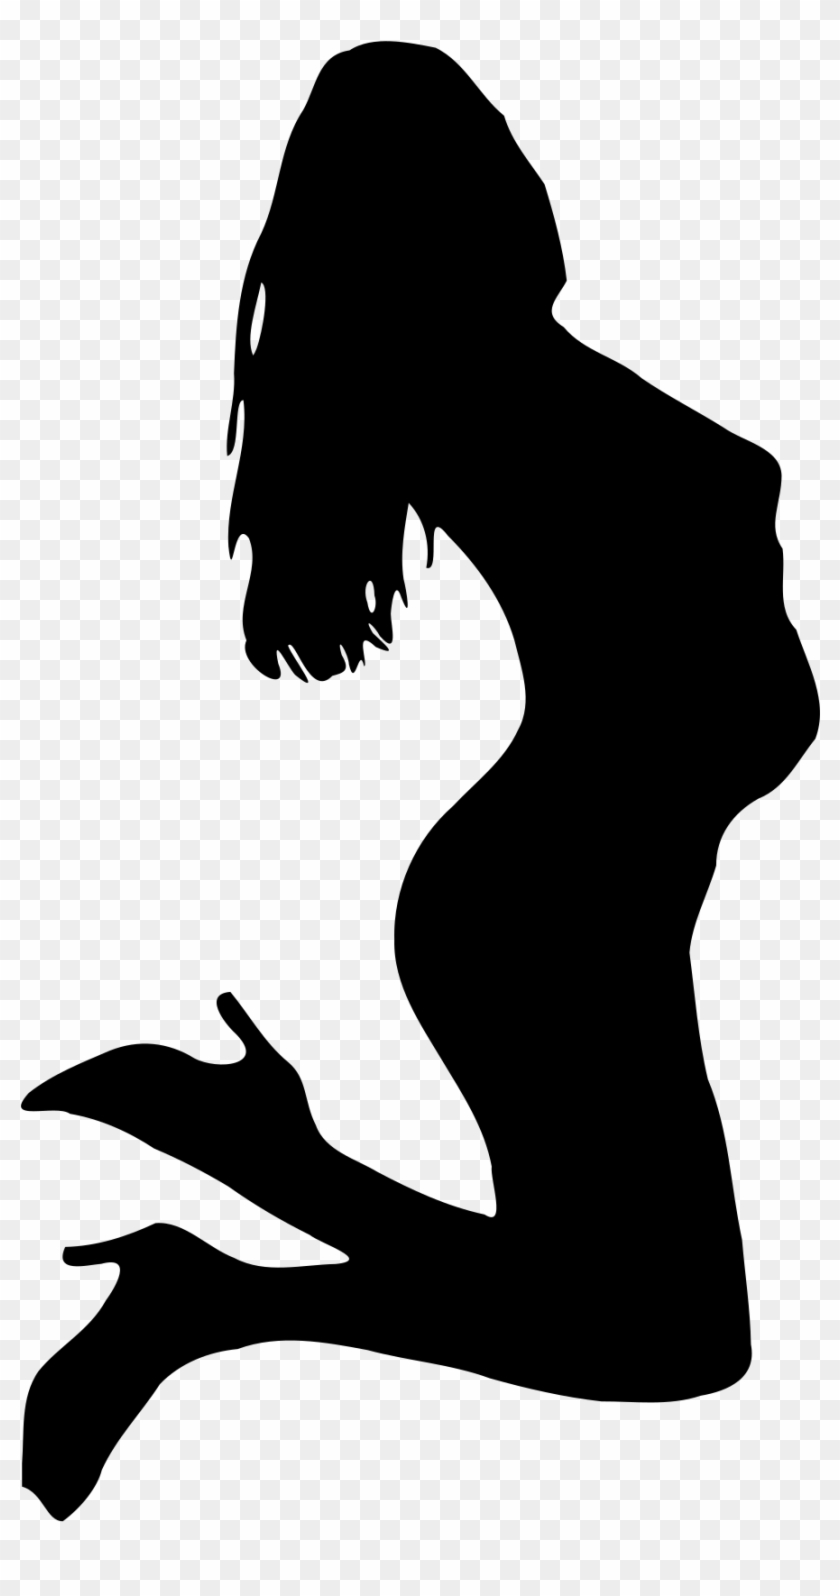 Big Image - Woman Sitting In Black Silhouette Png #1183176